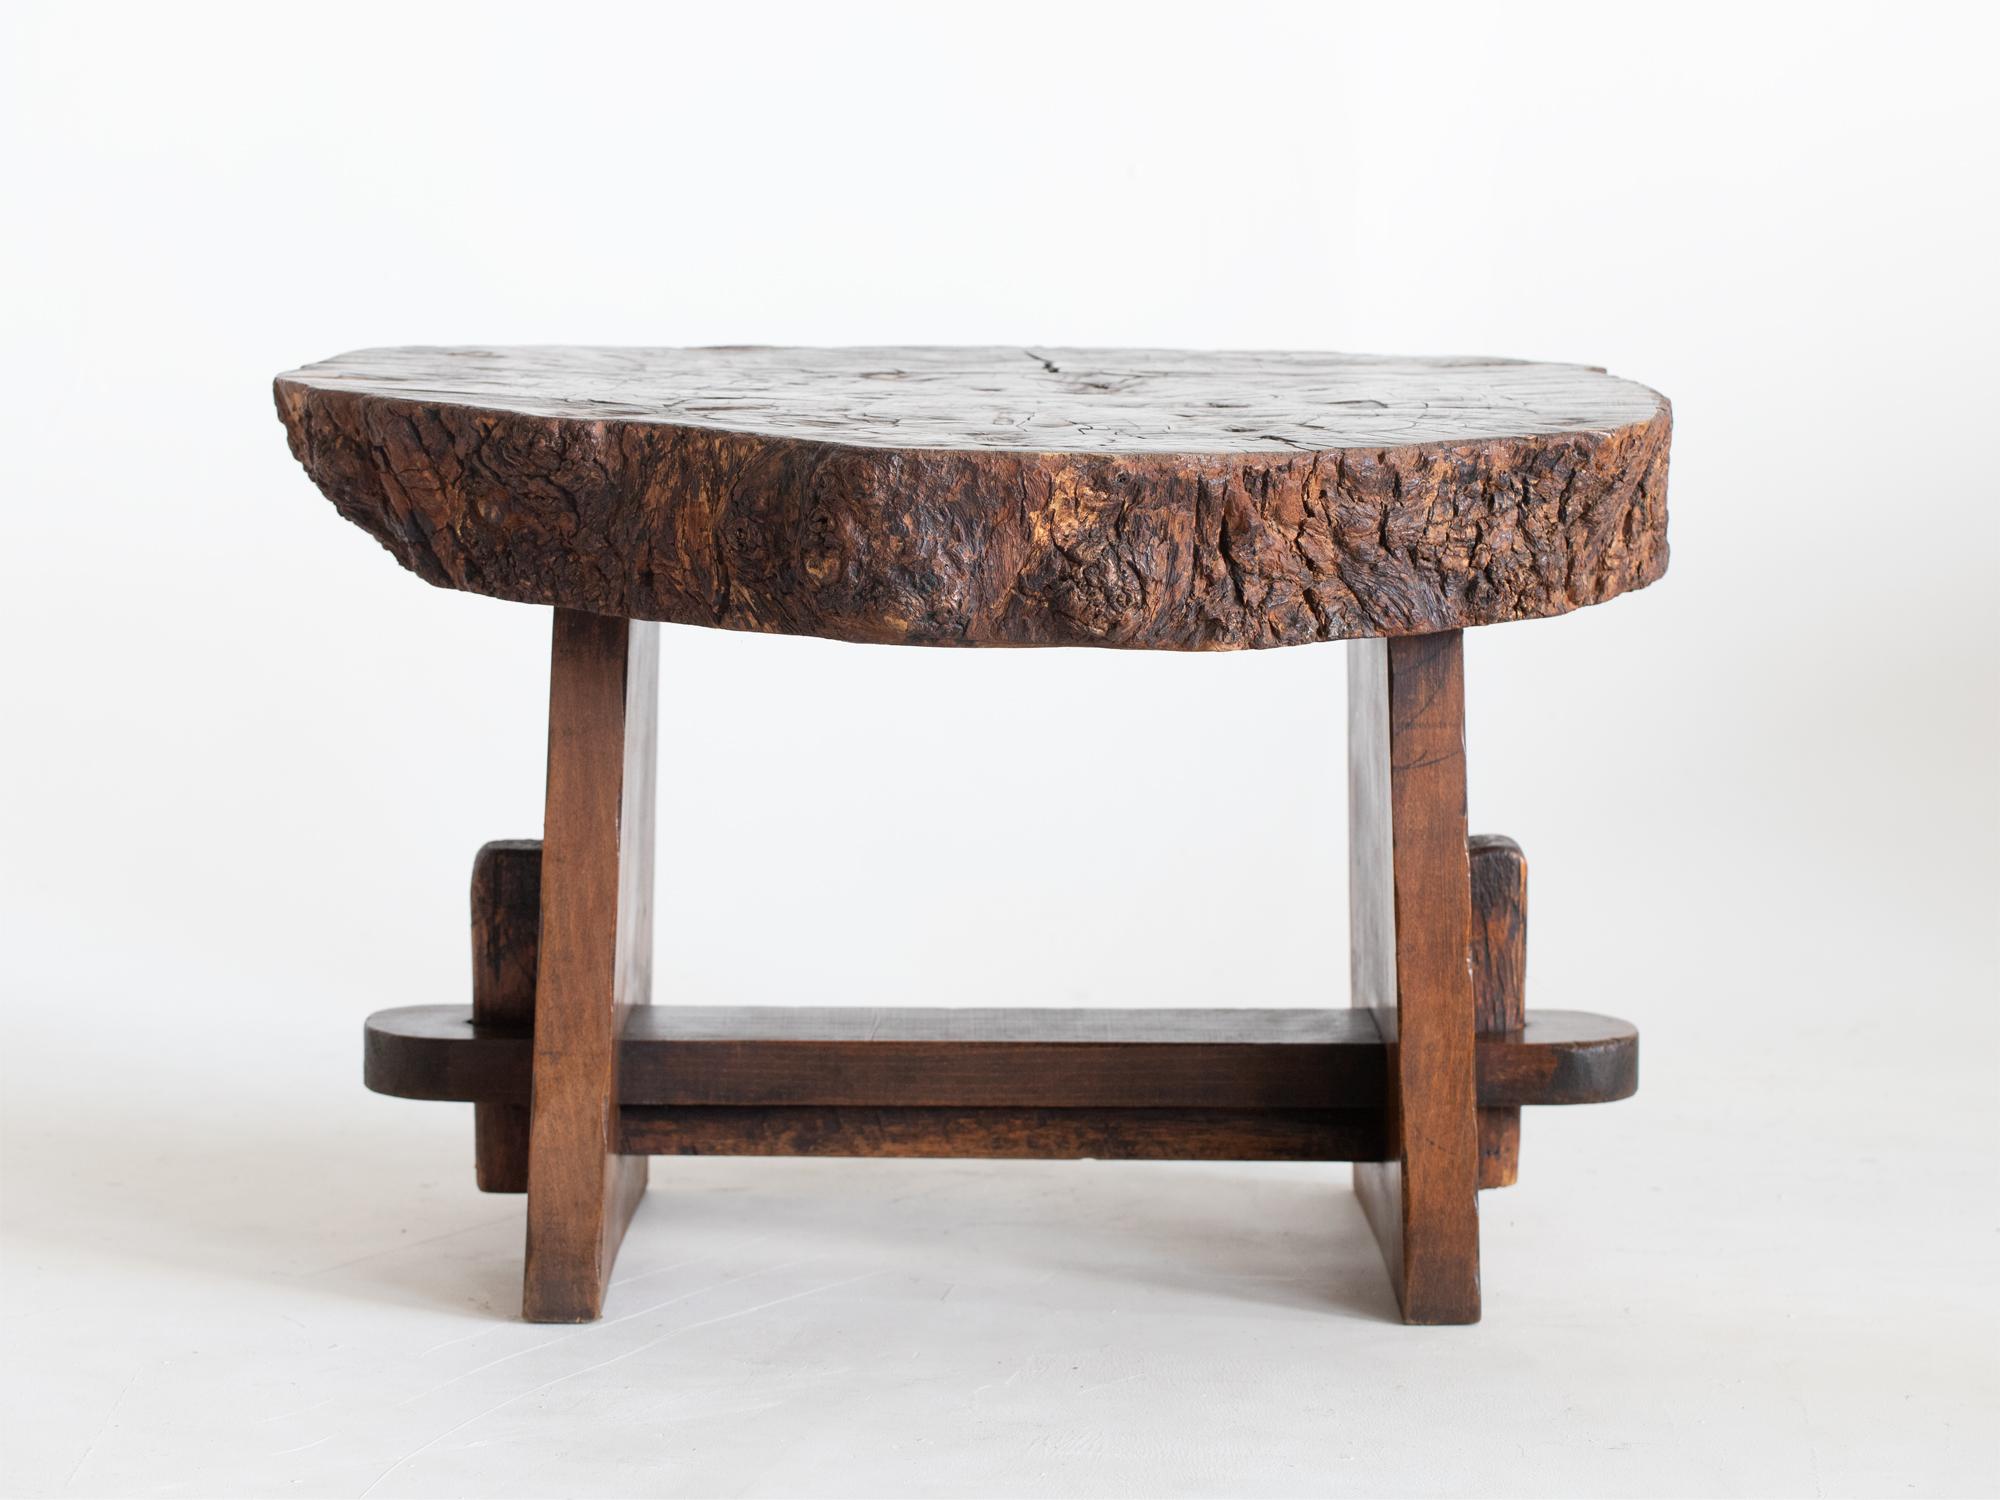 A brutalist live-edge coffee table with single slab of oak top raised on a beech trestle-form base. French, c. 1960s.

A heavy and solid piece with great character.

53 x 82 x 73 cm

20.9 x 32.3 x 28.7 